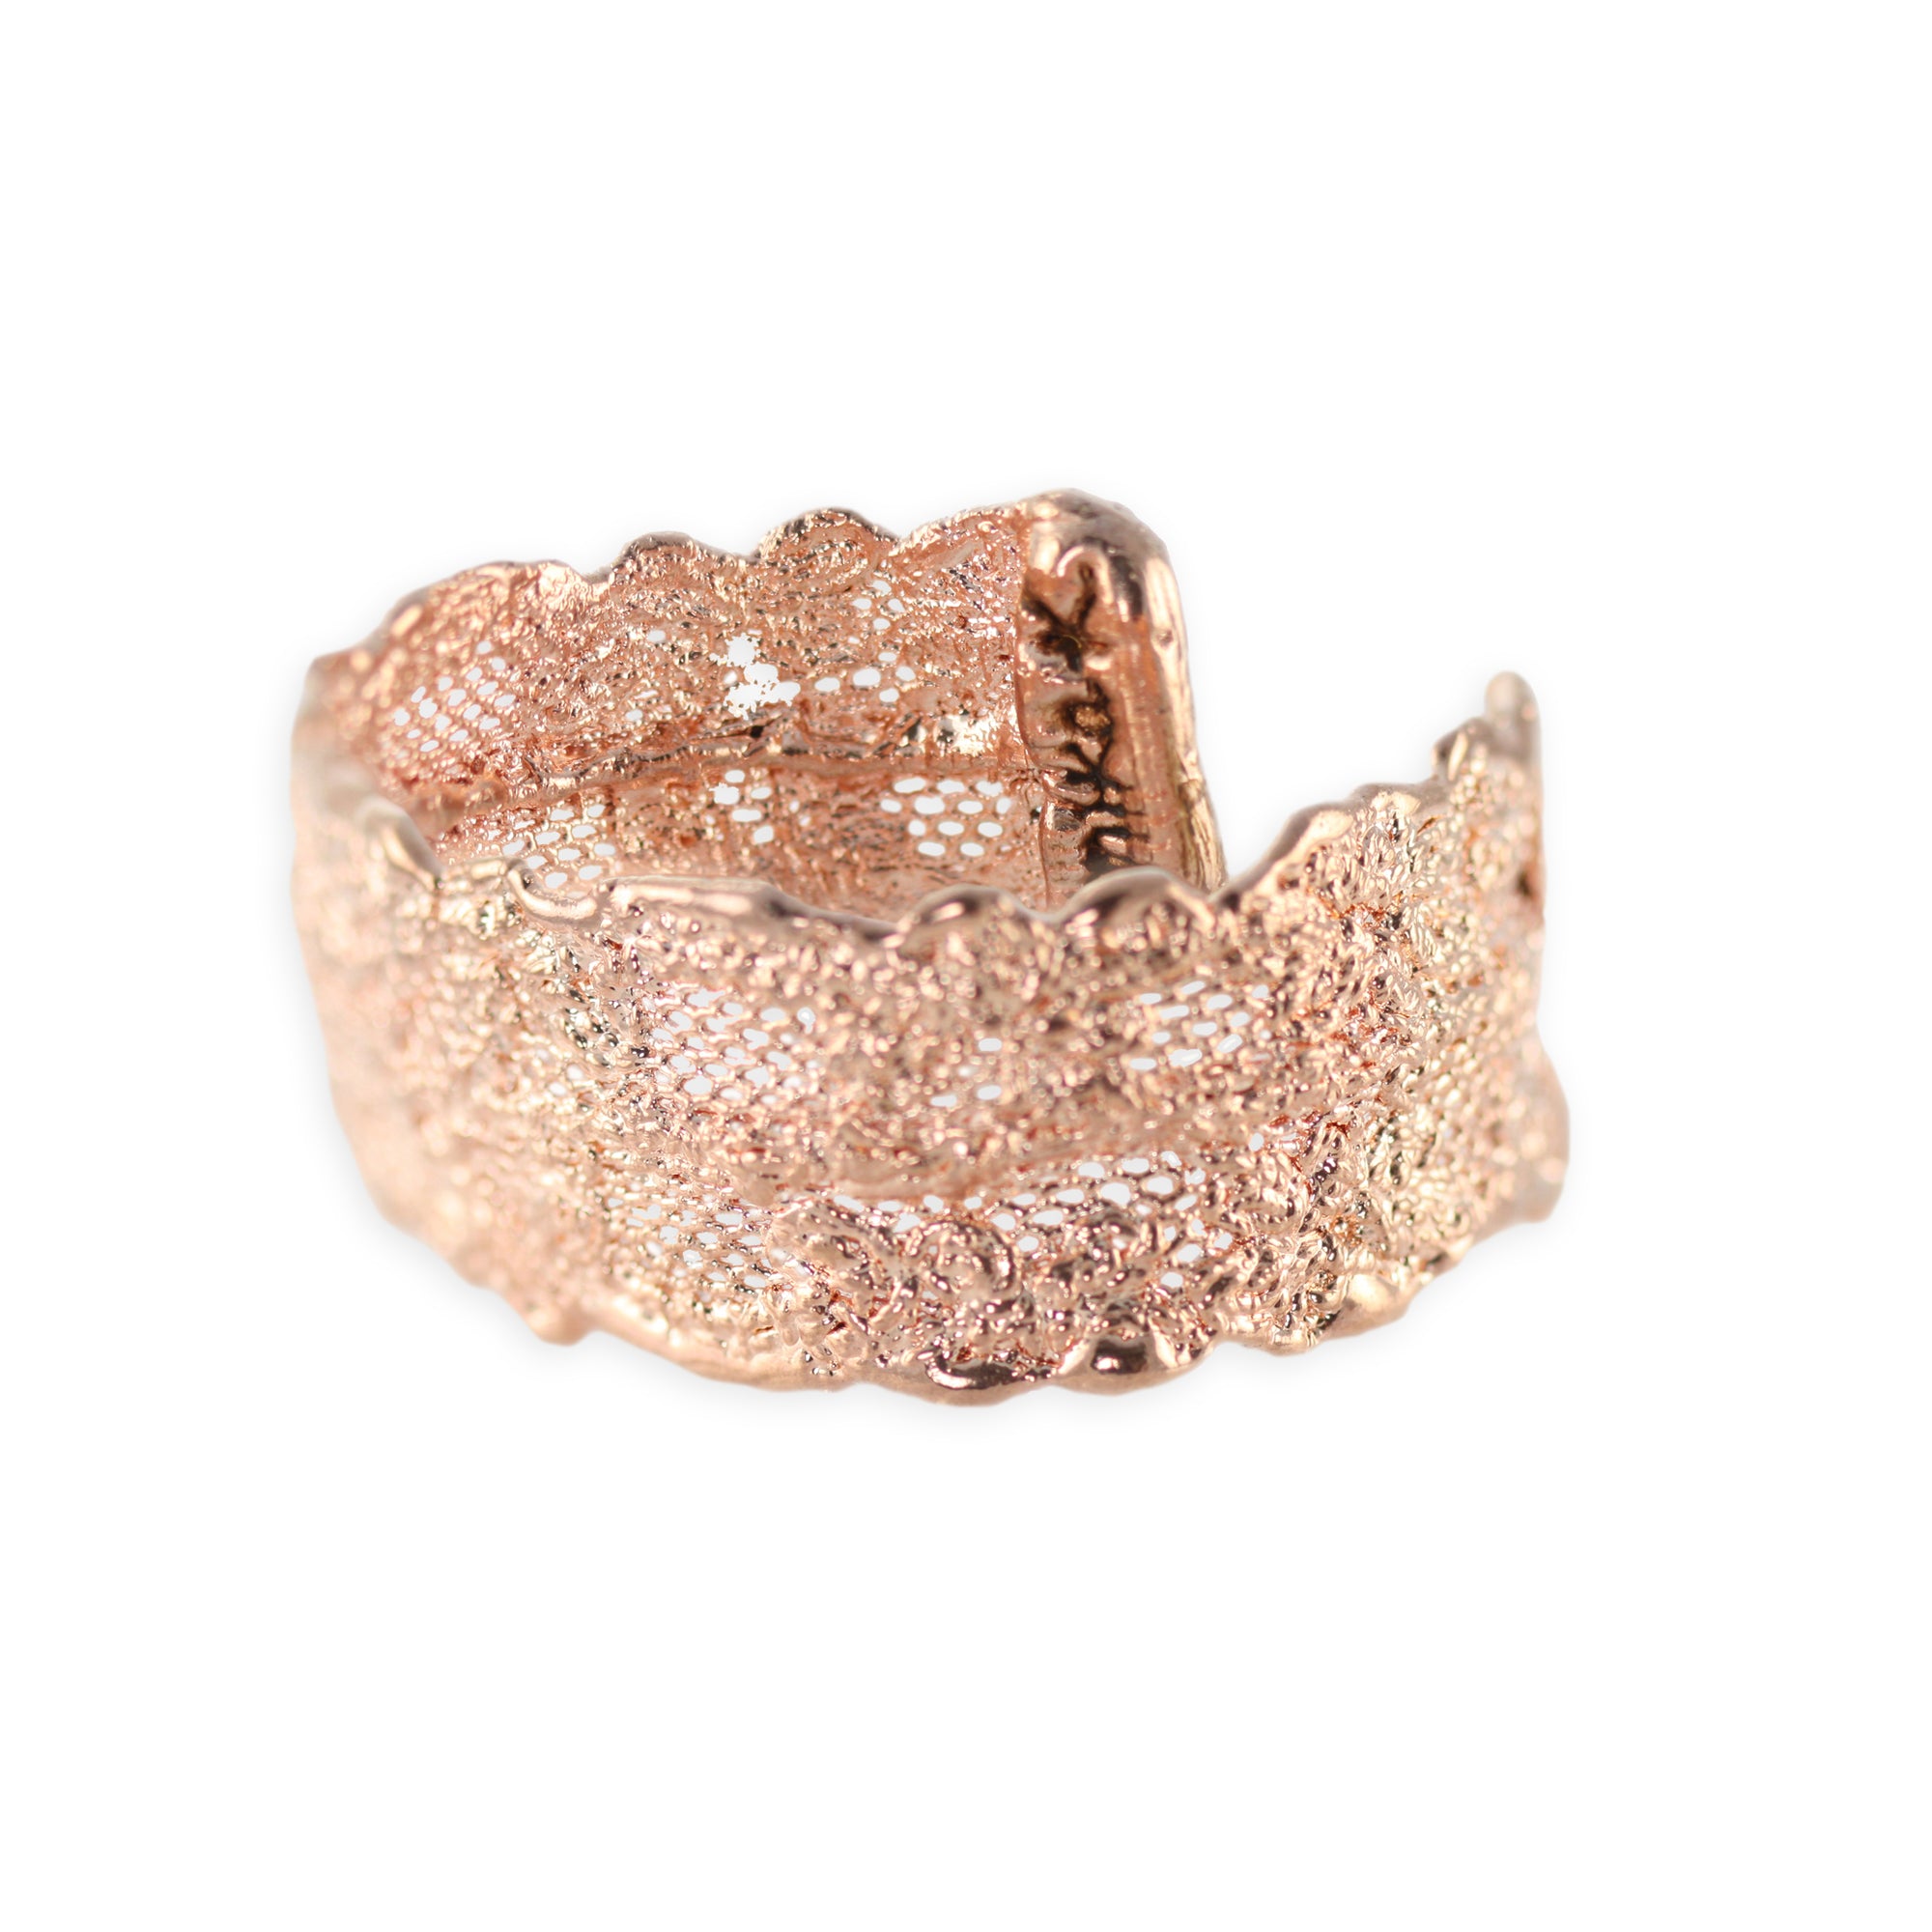 Small double scalloped lace bracelet in rose gold.